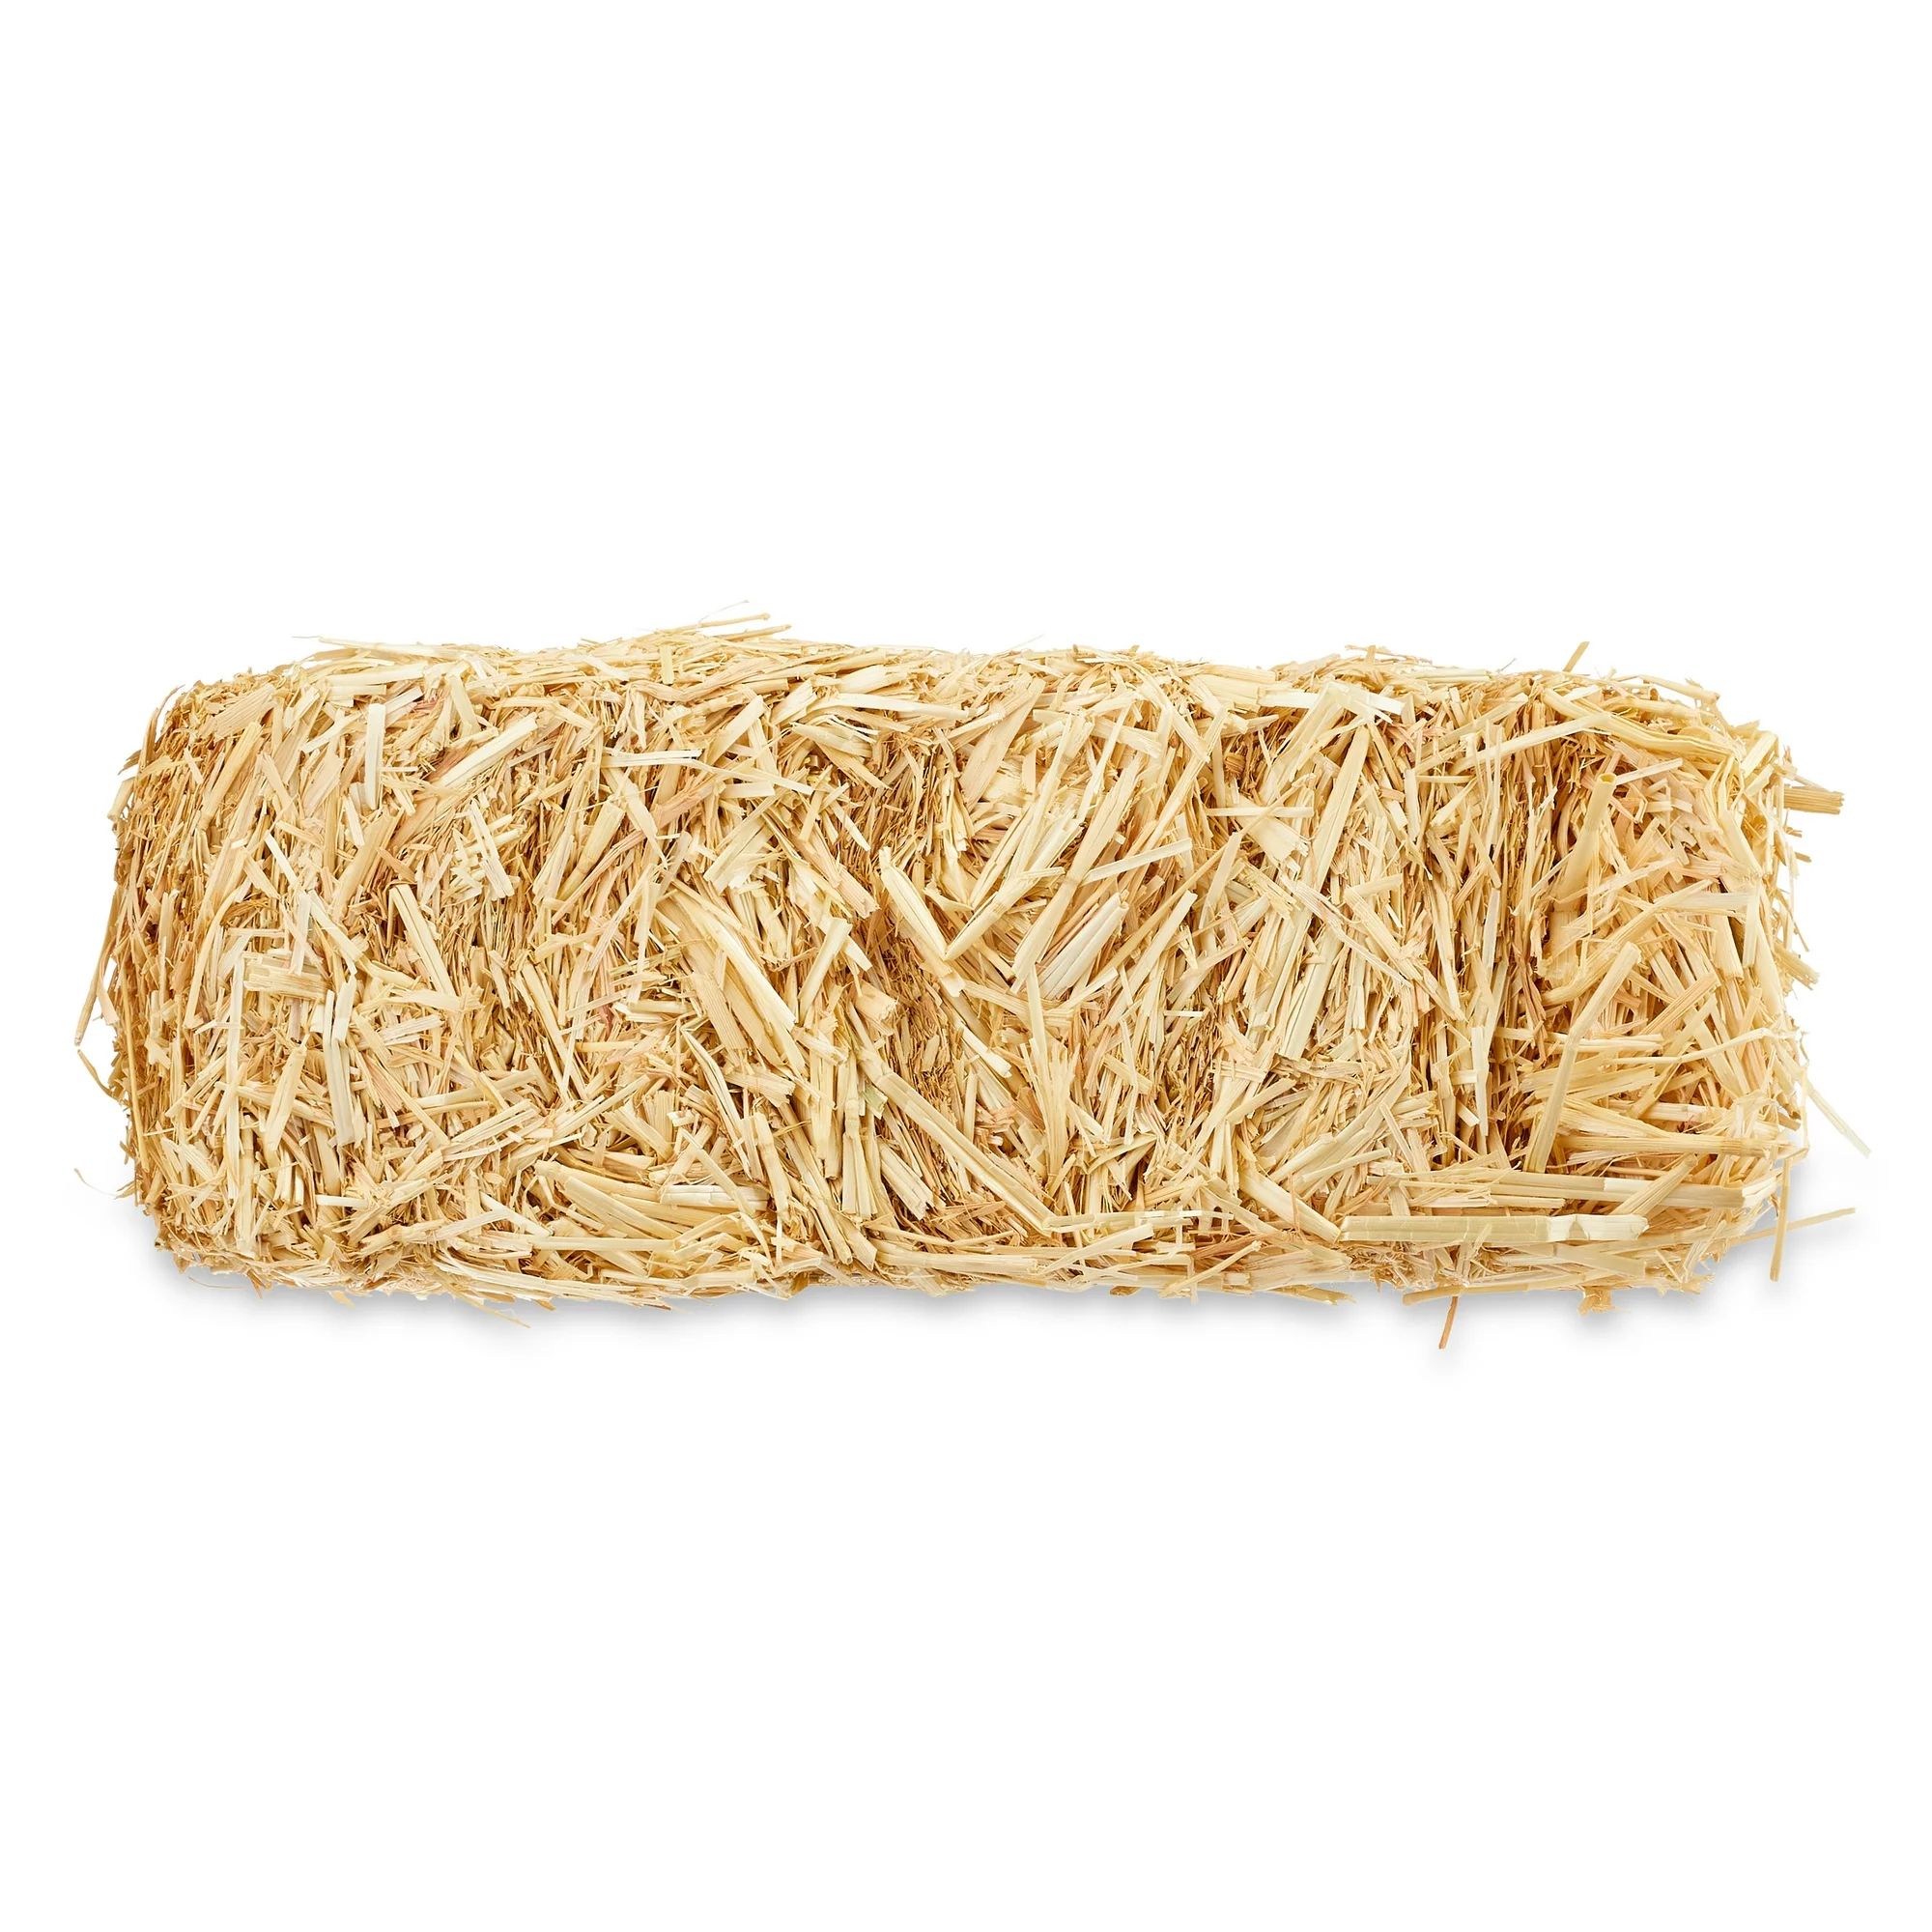 Fall, Harvest 13-inch Decorative Natural Straw Bale, Way to Celebrate | Walmart (US)